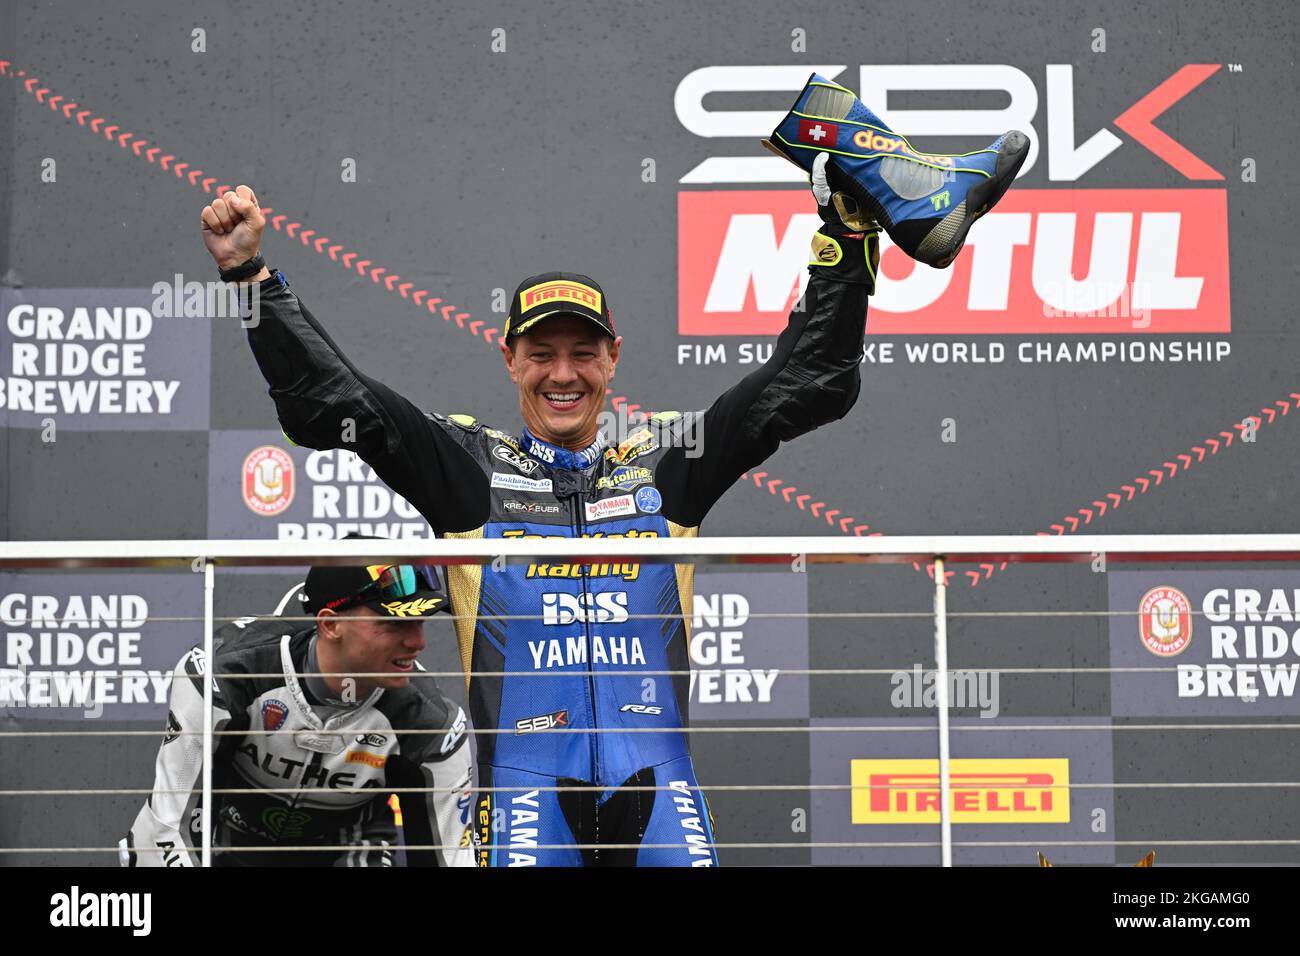 Dominique Aegerter celebrates victory in the World Supersport on the podium in Australia, raising his race boot ready for a shoey. Stock Photo